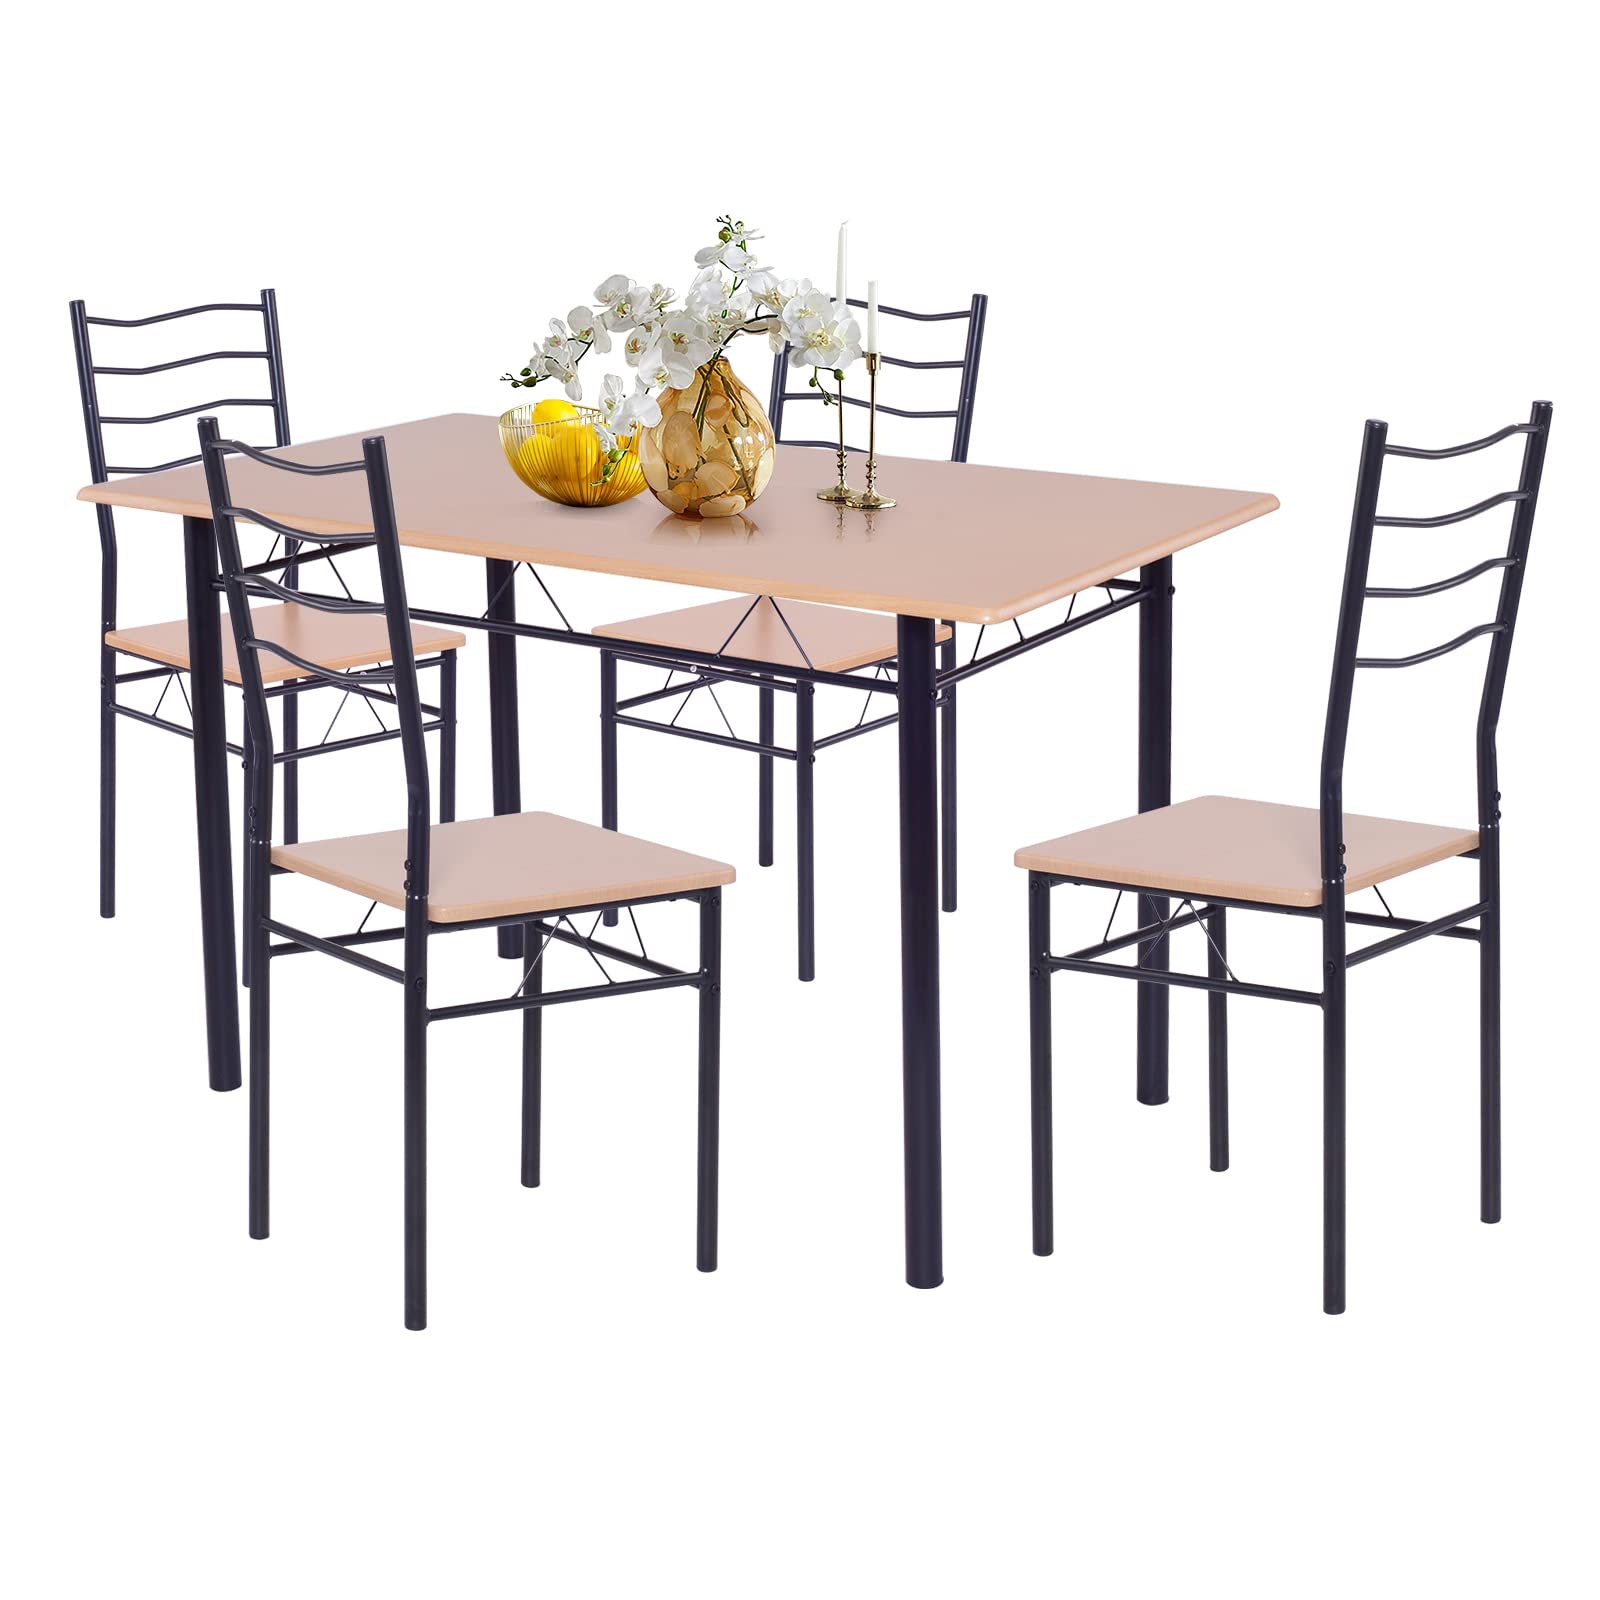 Giantex Modern 5 Piece Dining Table Set for 4 Chair